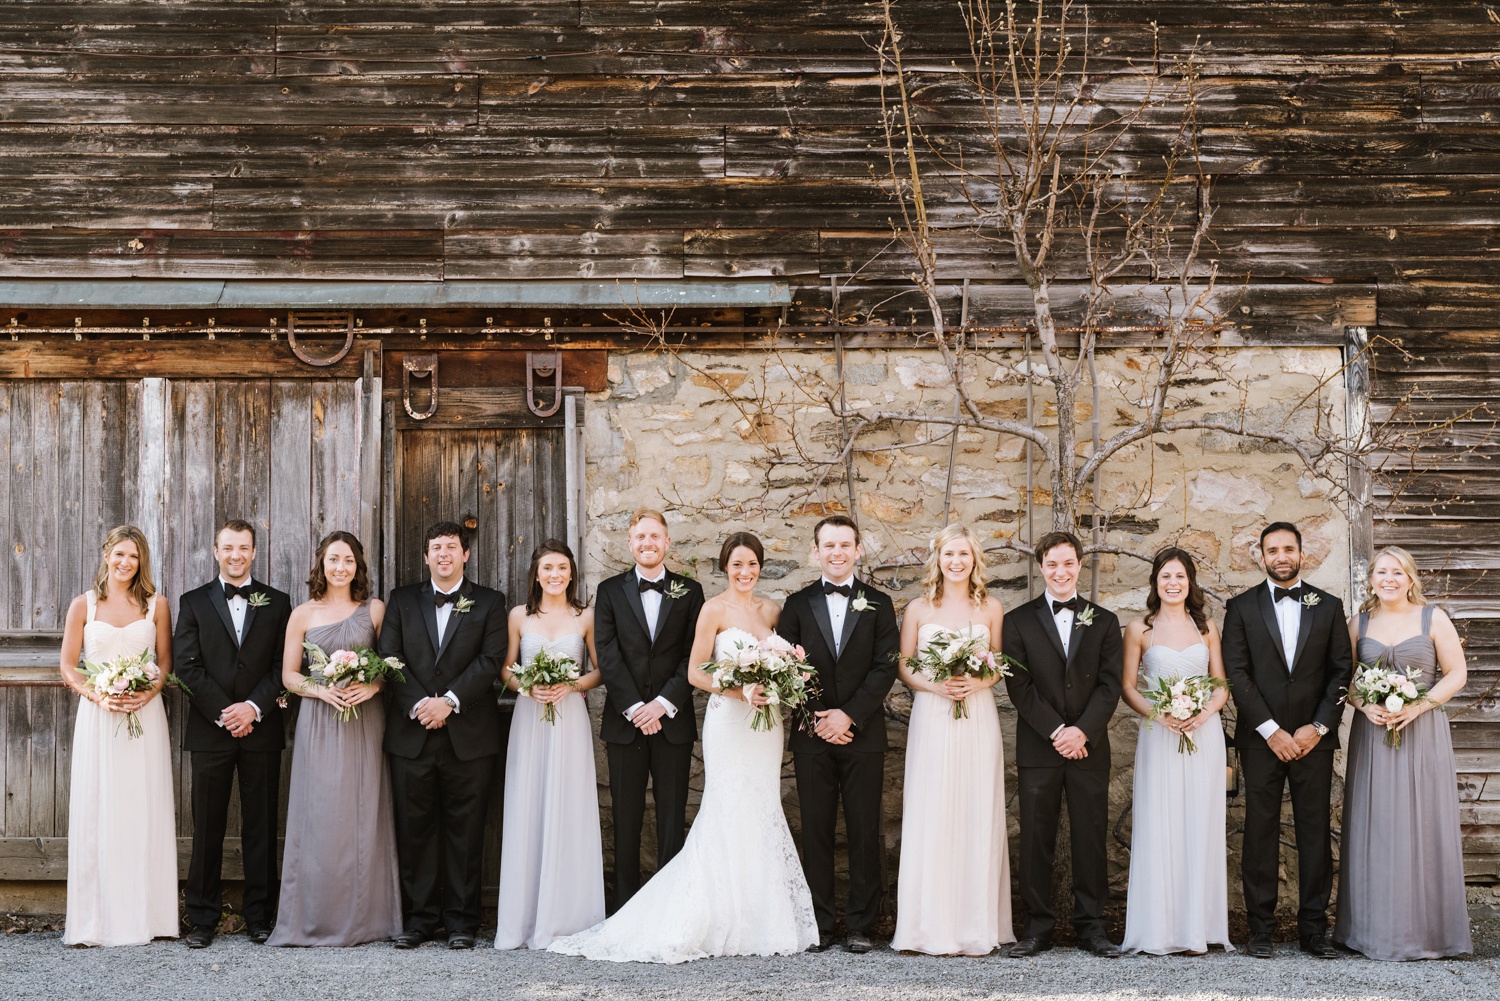 Classic Black Tie Wedding at Rustic Gedney Farm in the Berkshires by Boston Wedding Photographer Annmarie Swift